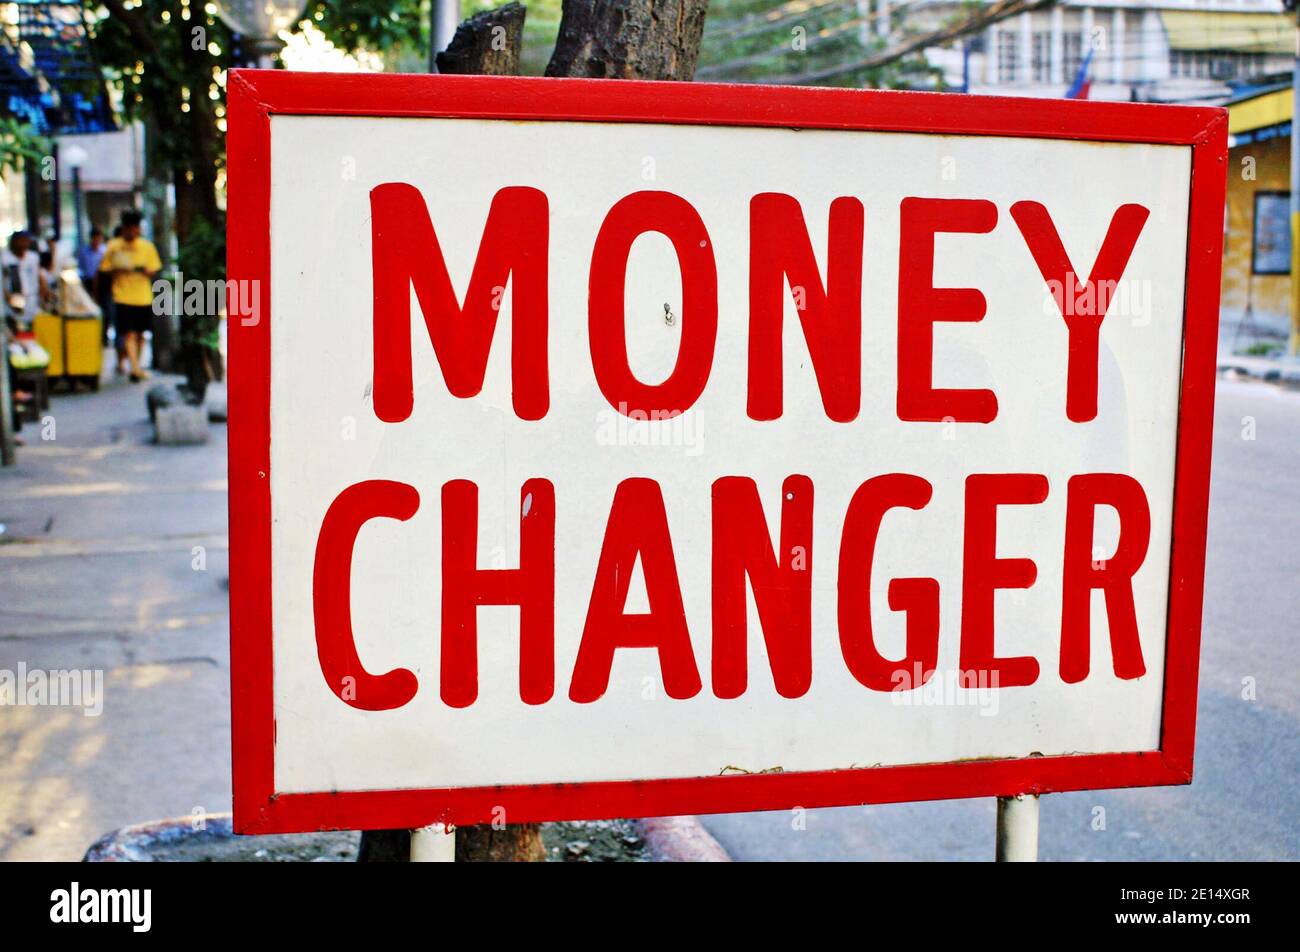 Money Changer sign outside a business in Manila, Philippines.  Previously a colony of the United States, the country uses the Philippines Peso as well as the US dollar throughout the economy.  Many from the Philippines work overseas thus bringing dollars back and exchanging them into the peso is popular. Stock Photo